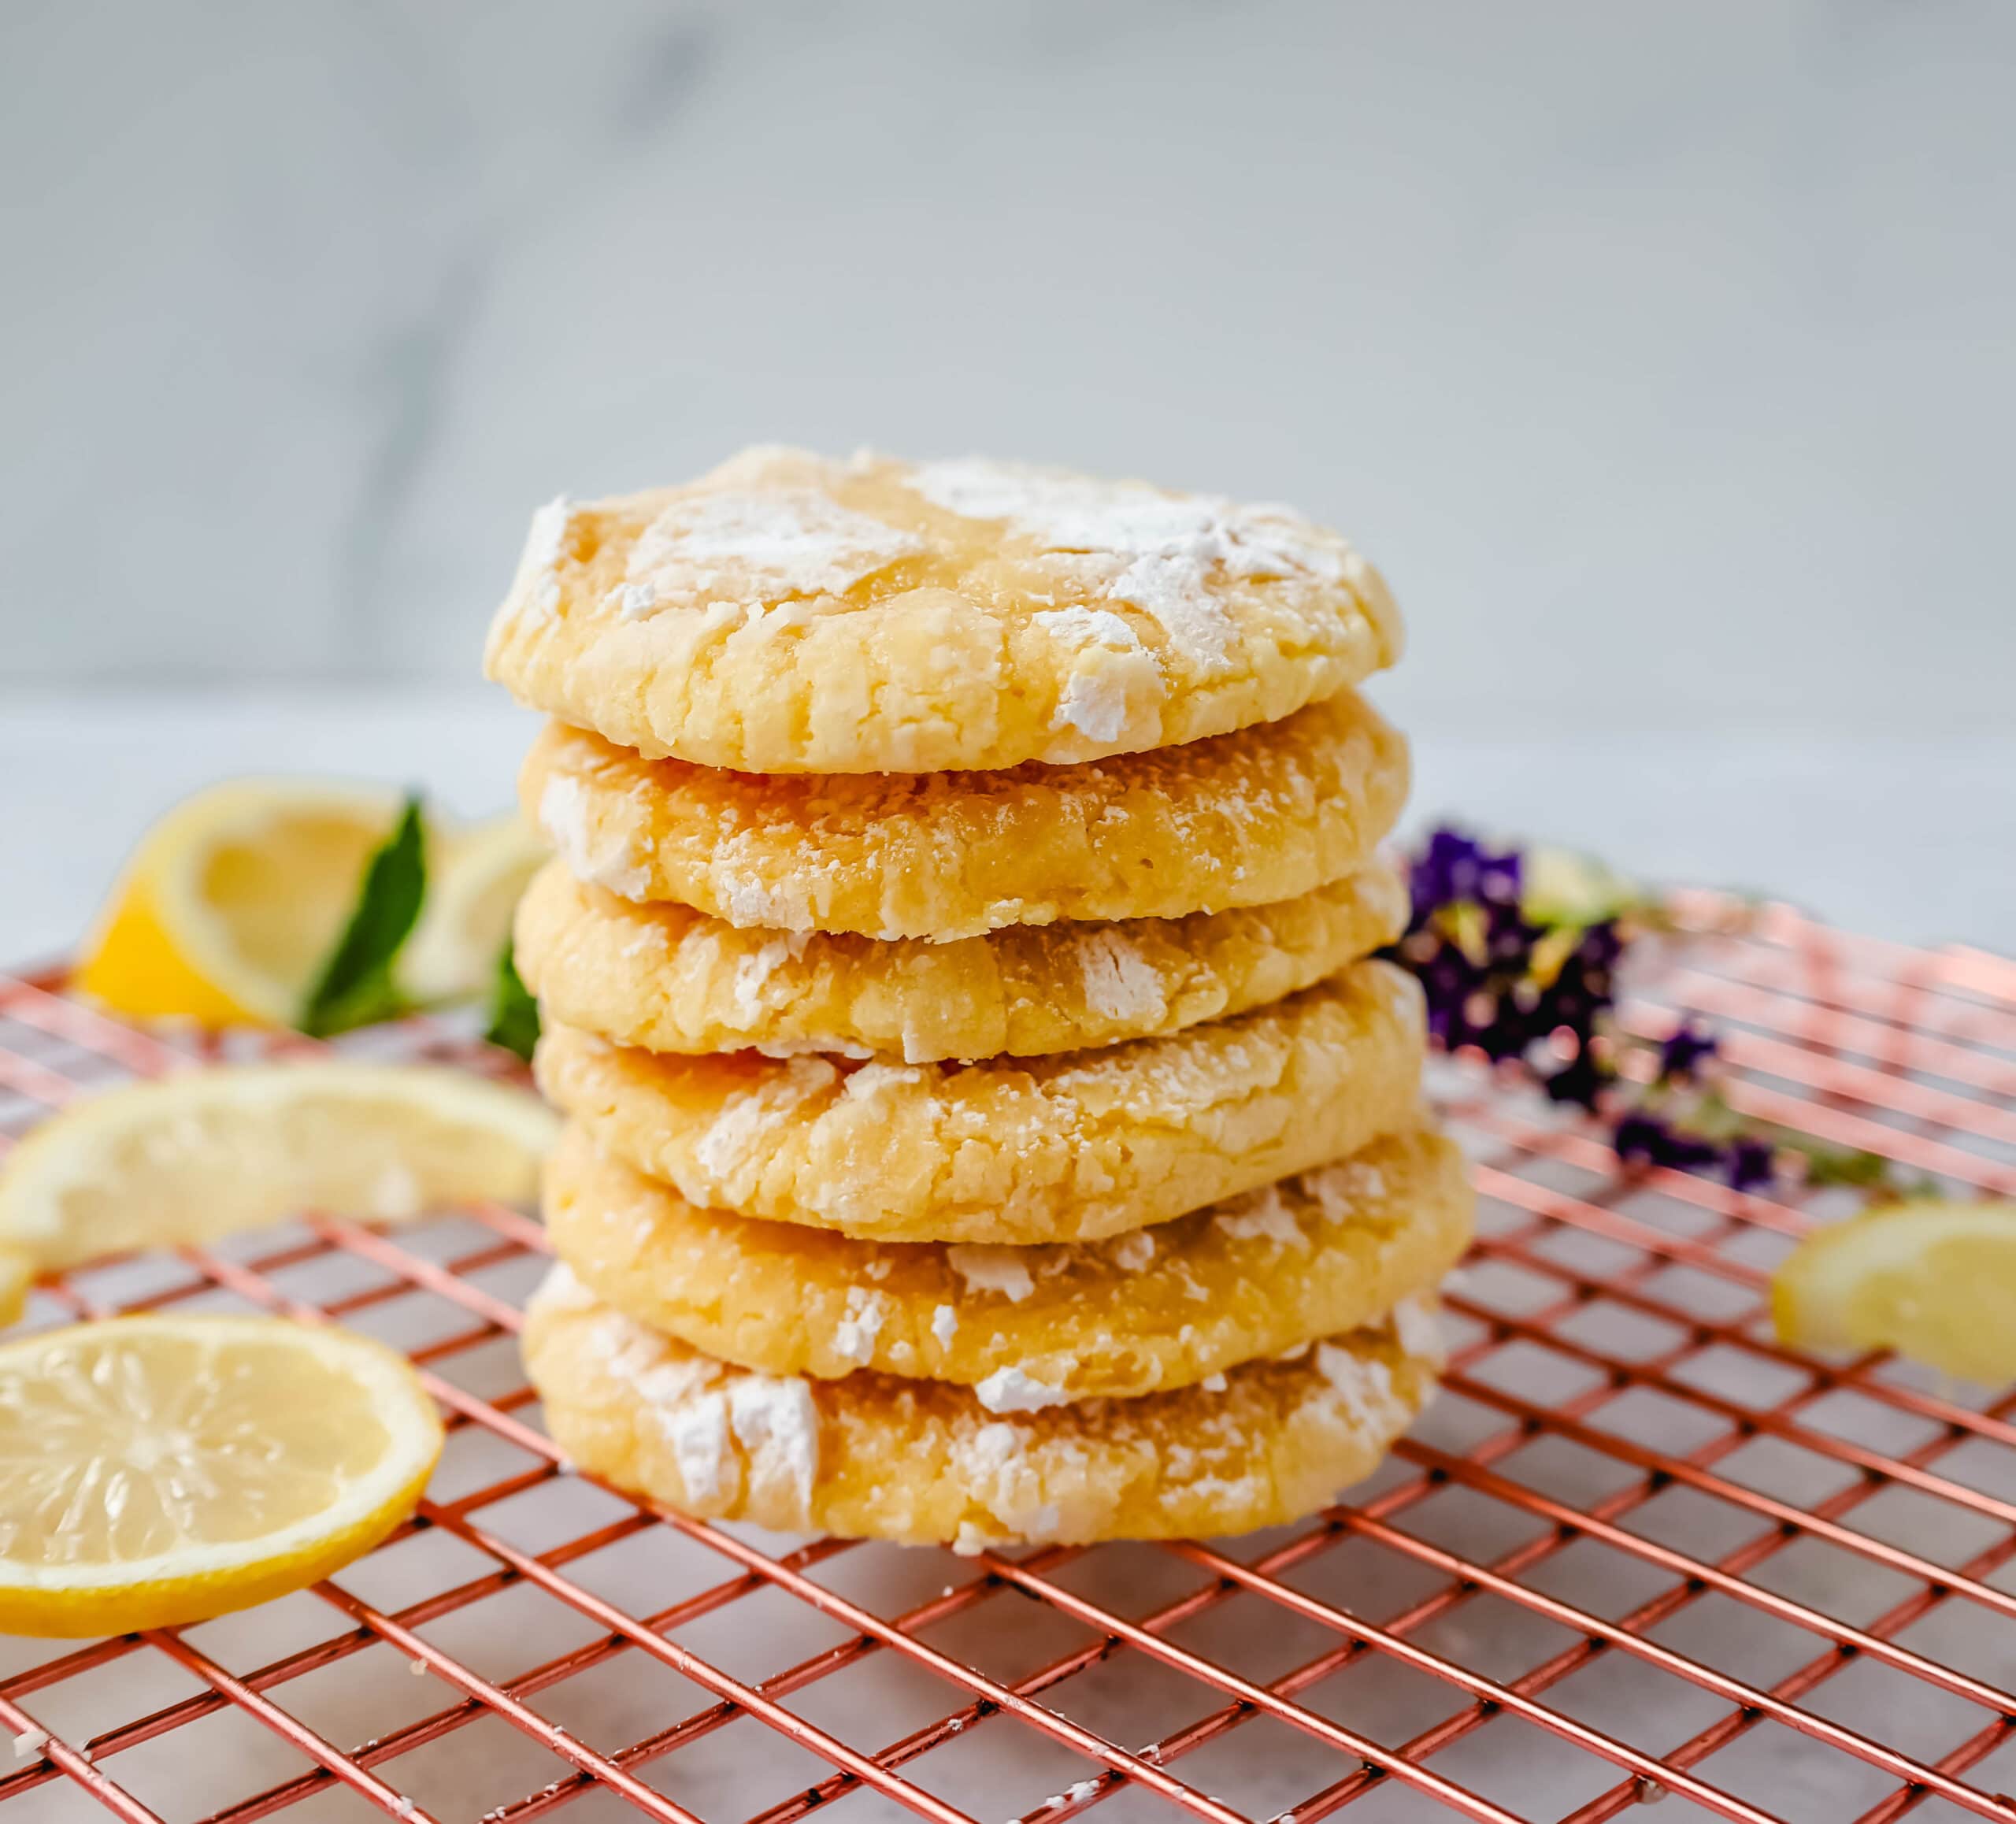 Soft chewy lemon cookies with fresh lemon juice, lemon zest, and lemon extract to give them the extra lemon tang! These lemon crinkle cookies are rolled in powdered sugar and baked until soft and chewy. The best lemon cookie recipe!